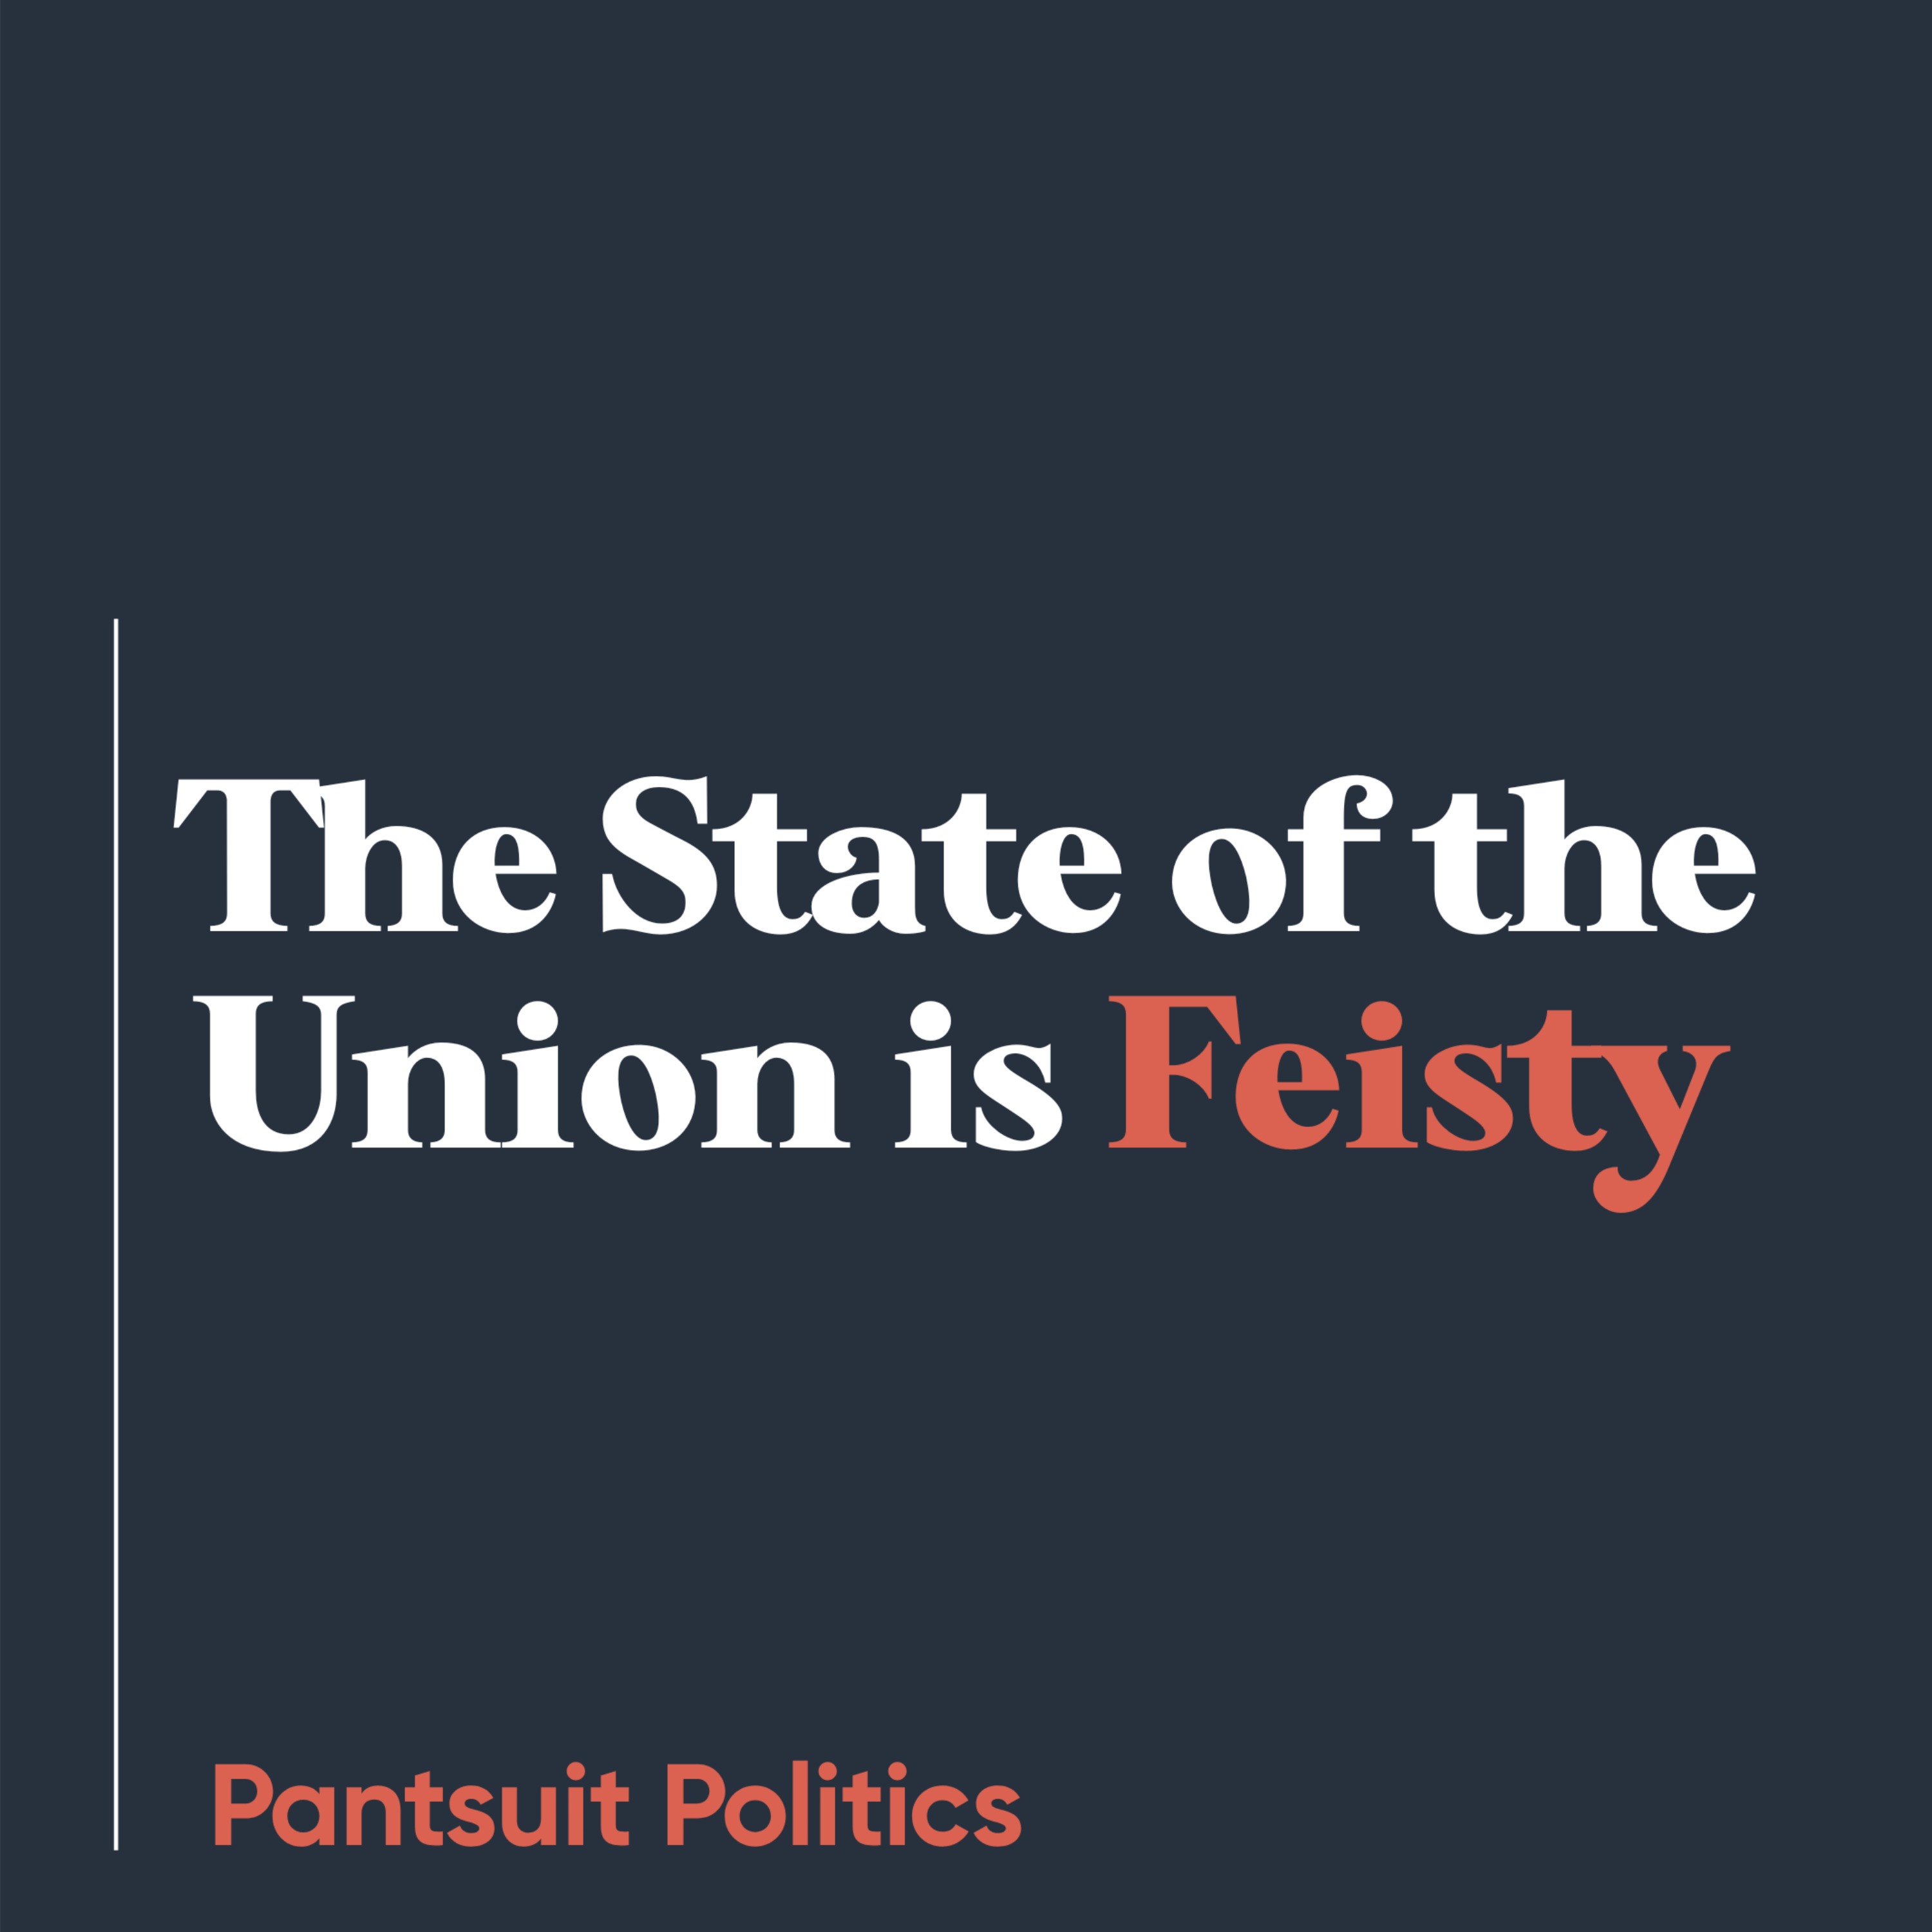 The State of the Union is Feisty